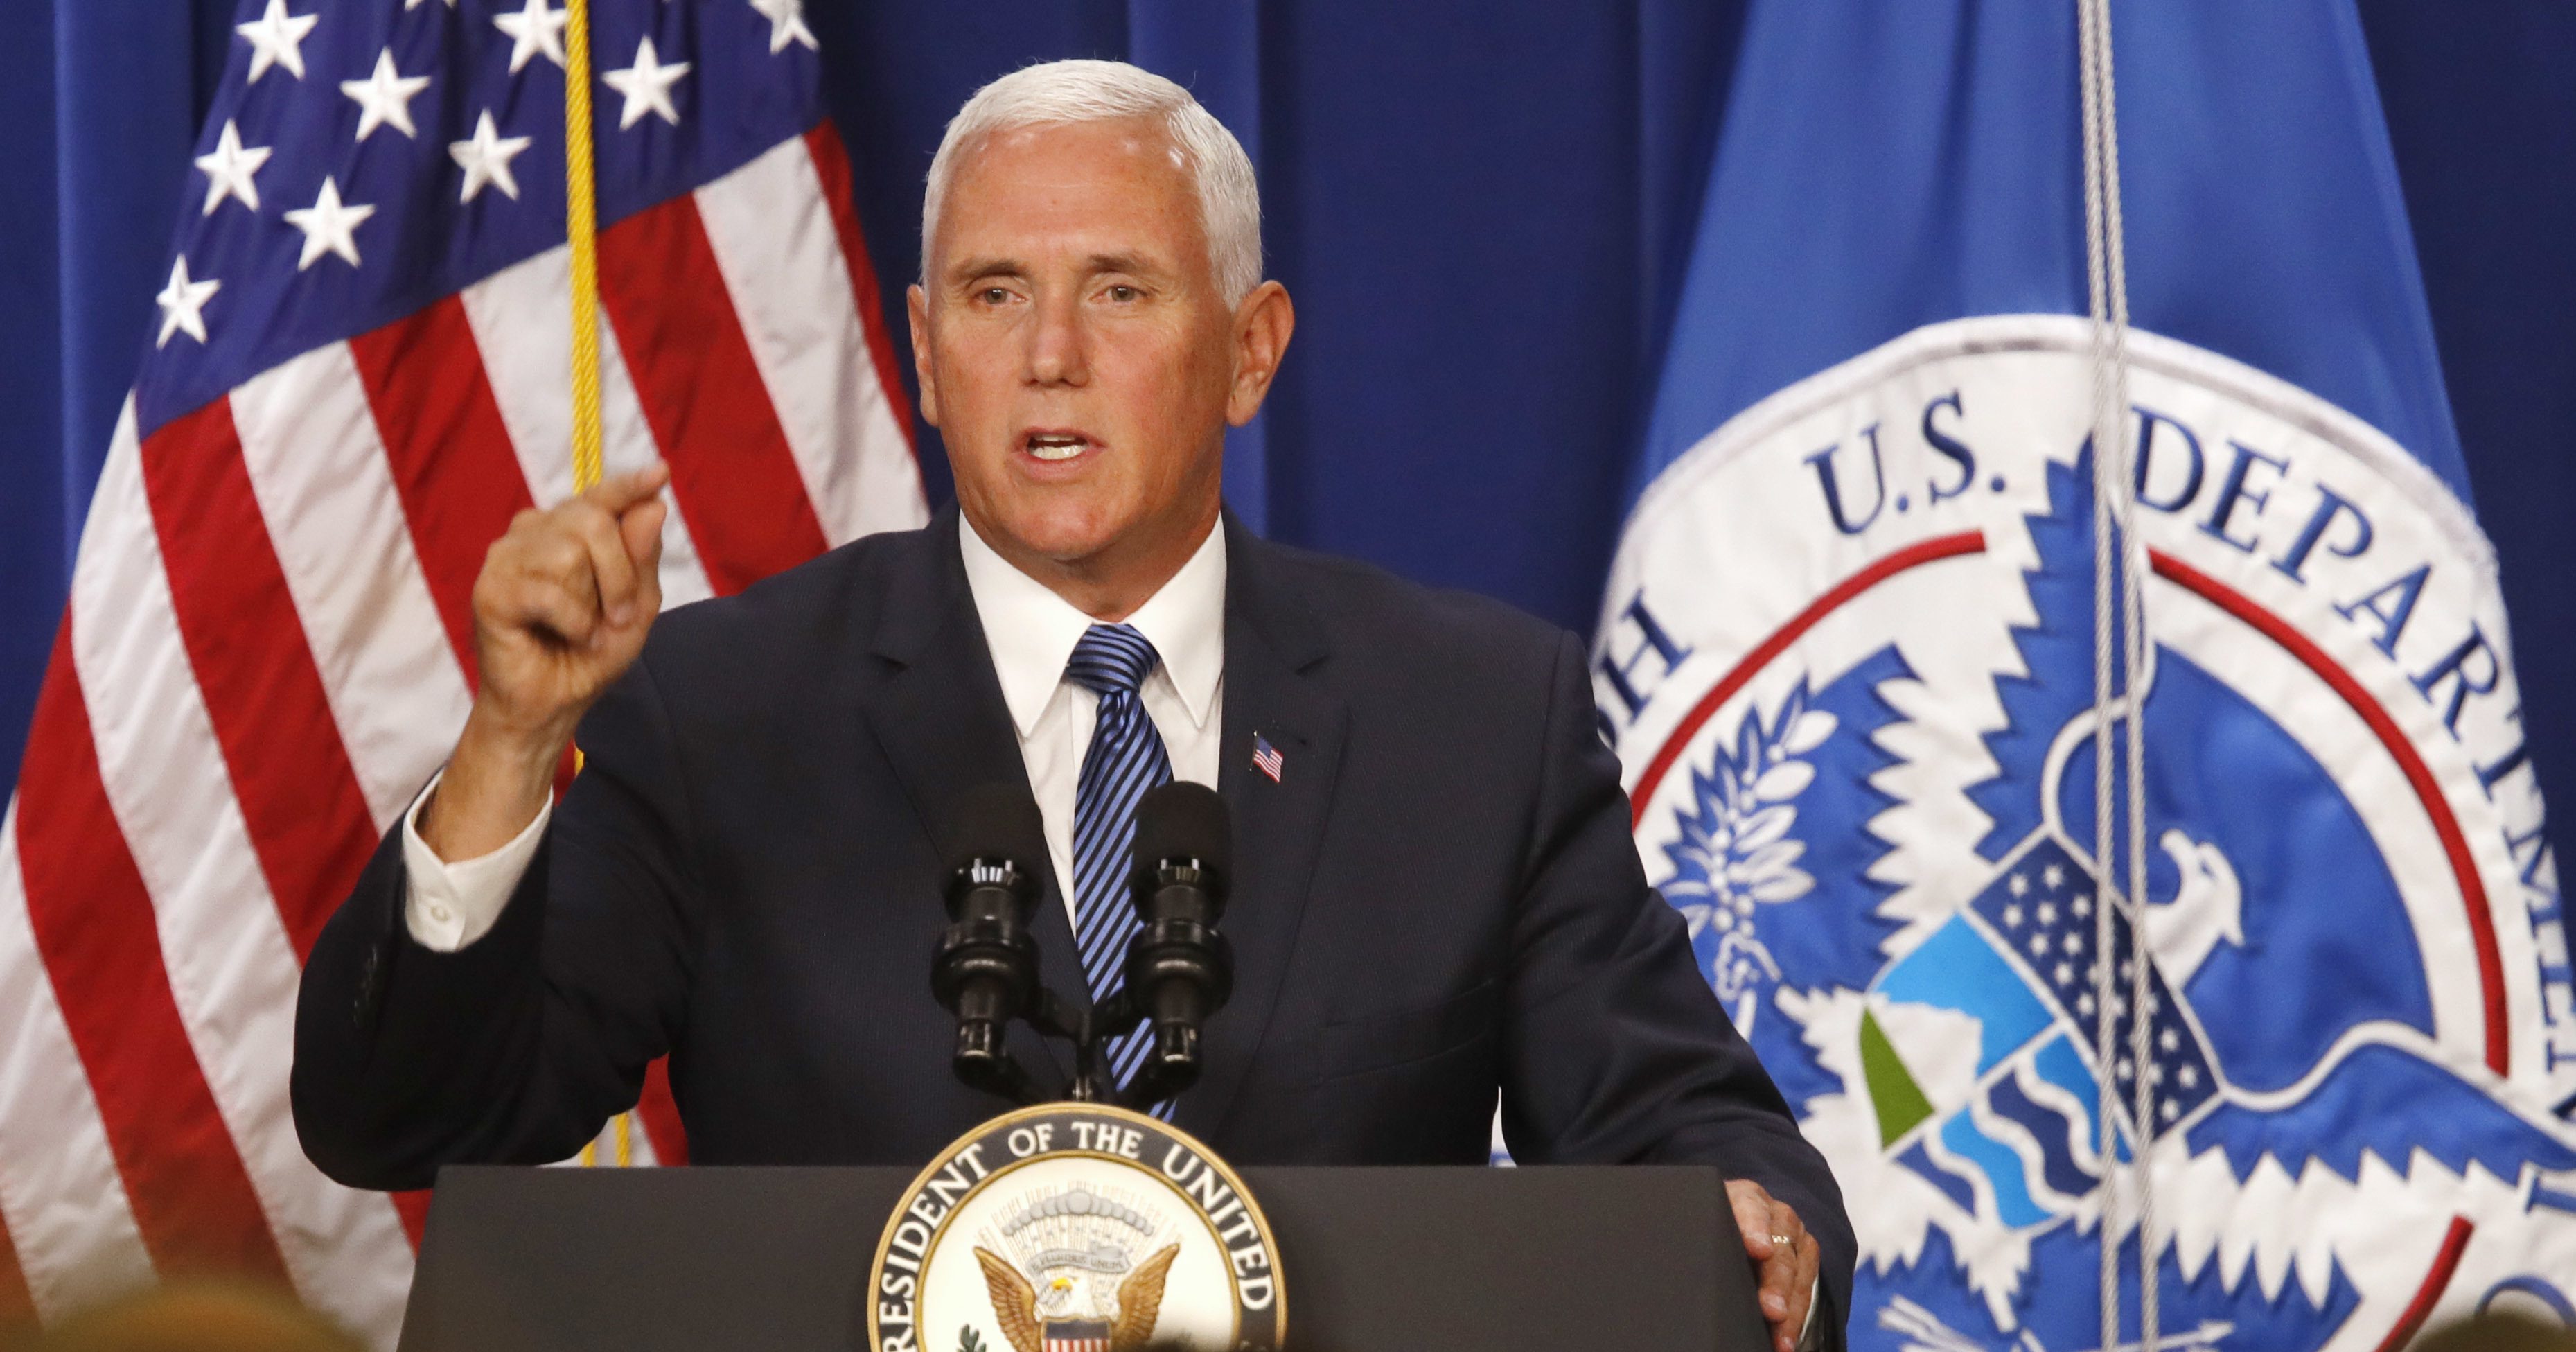 Vice President Mike Pence speaks at U.S. Immigration and Customs Enforcement (ICE), at ICE headquarters, Friday, July 6, 2018, in Washington. Pence is defending federal immigration authorities charged with detaining and deporting unauthorized immigrants and accusing Democrats of making opposition to the agency the "center" of their party.